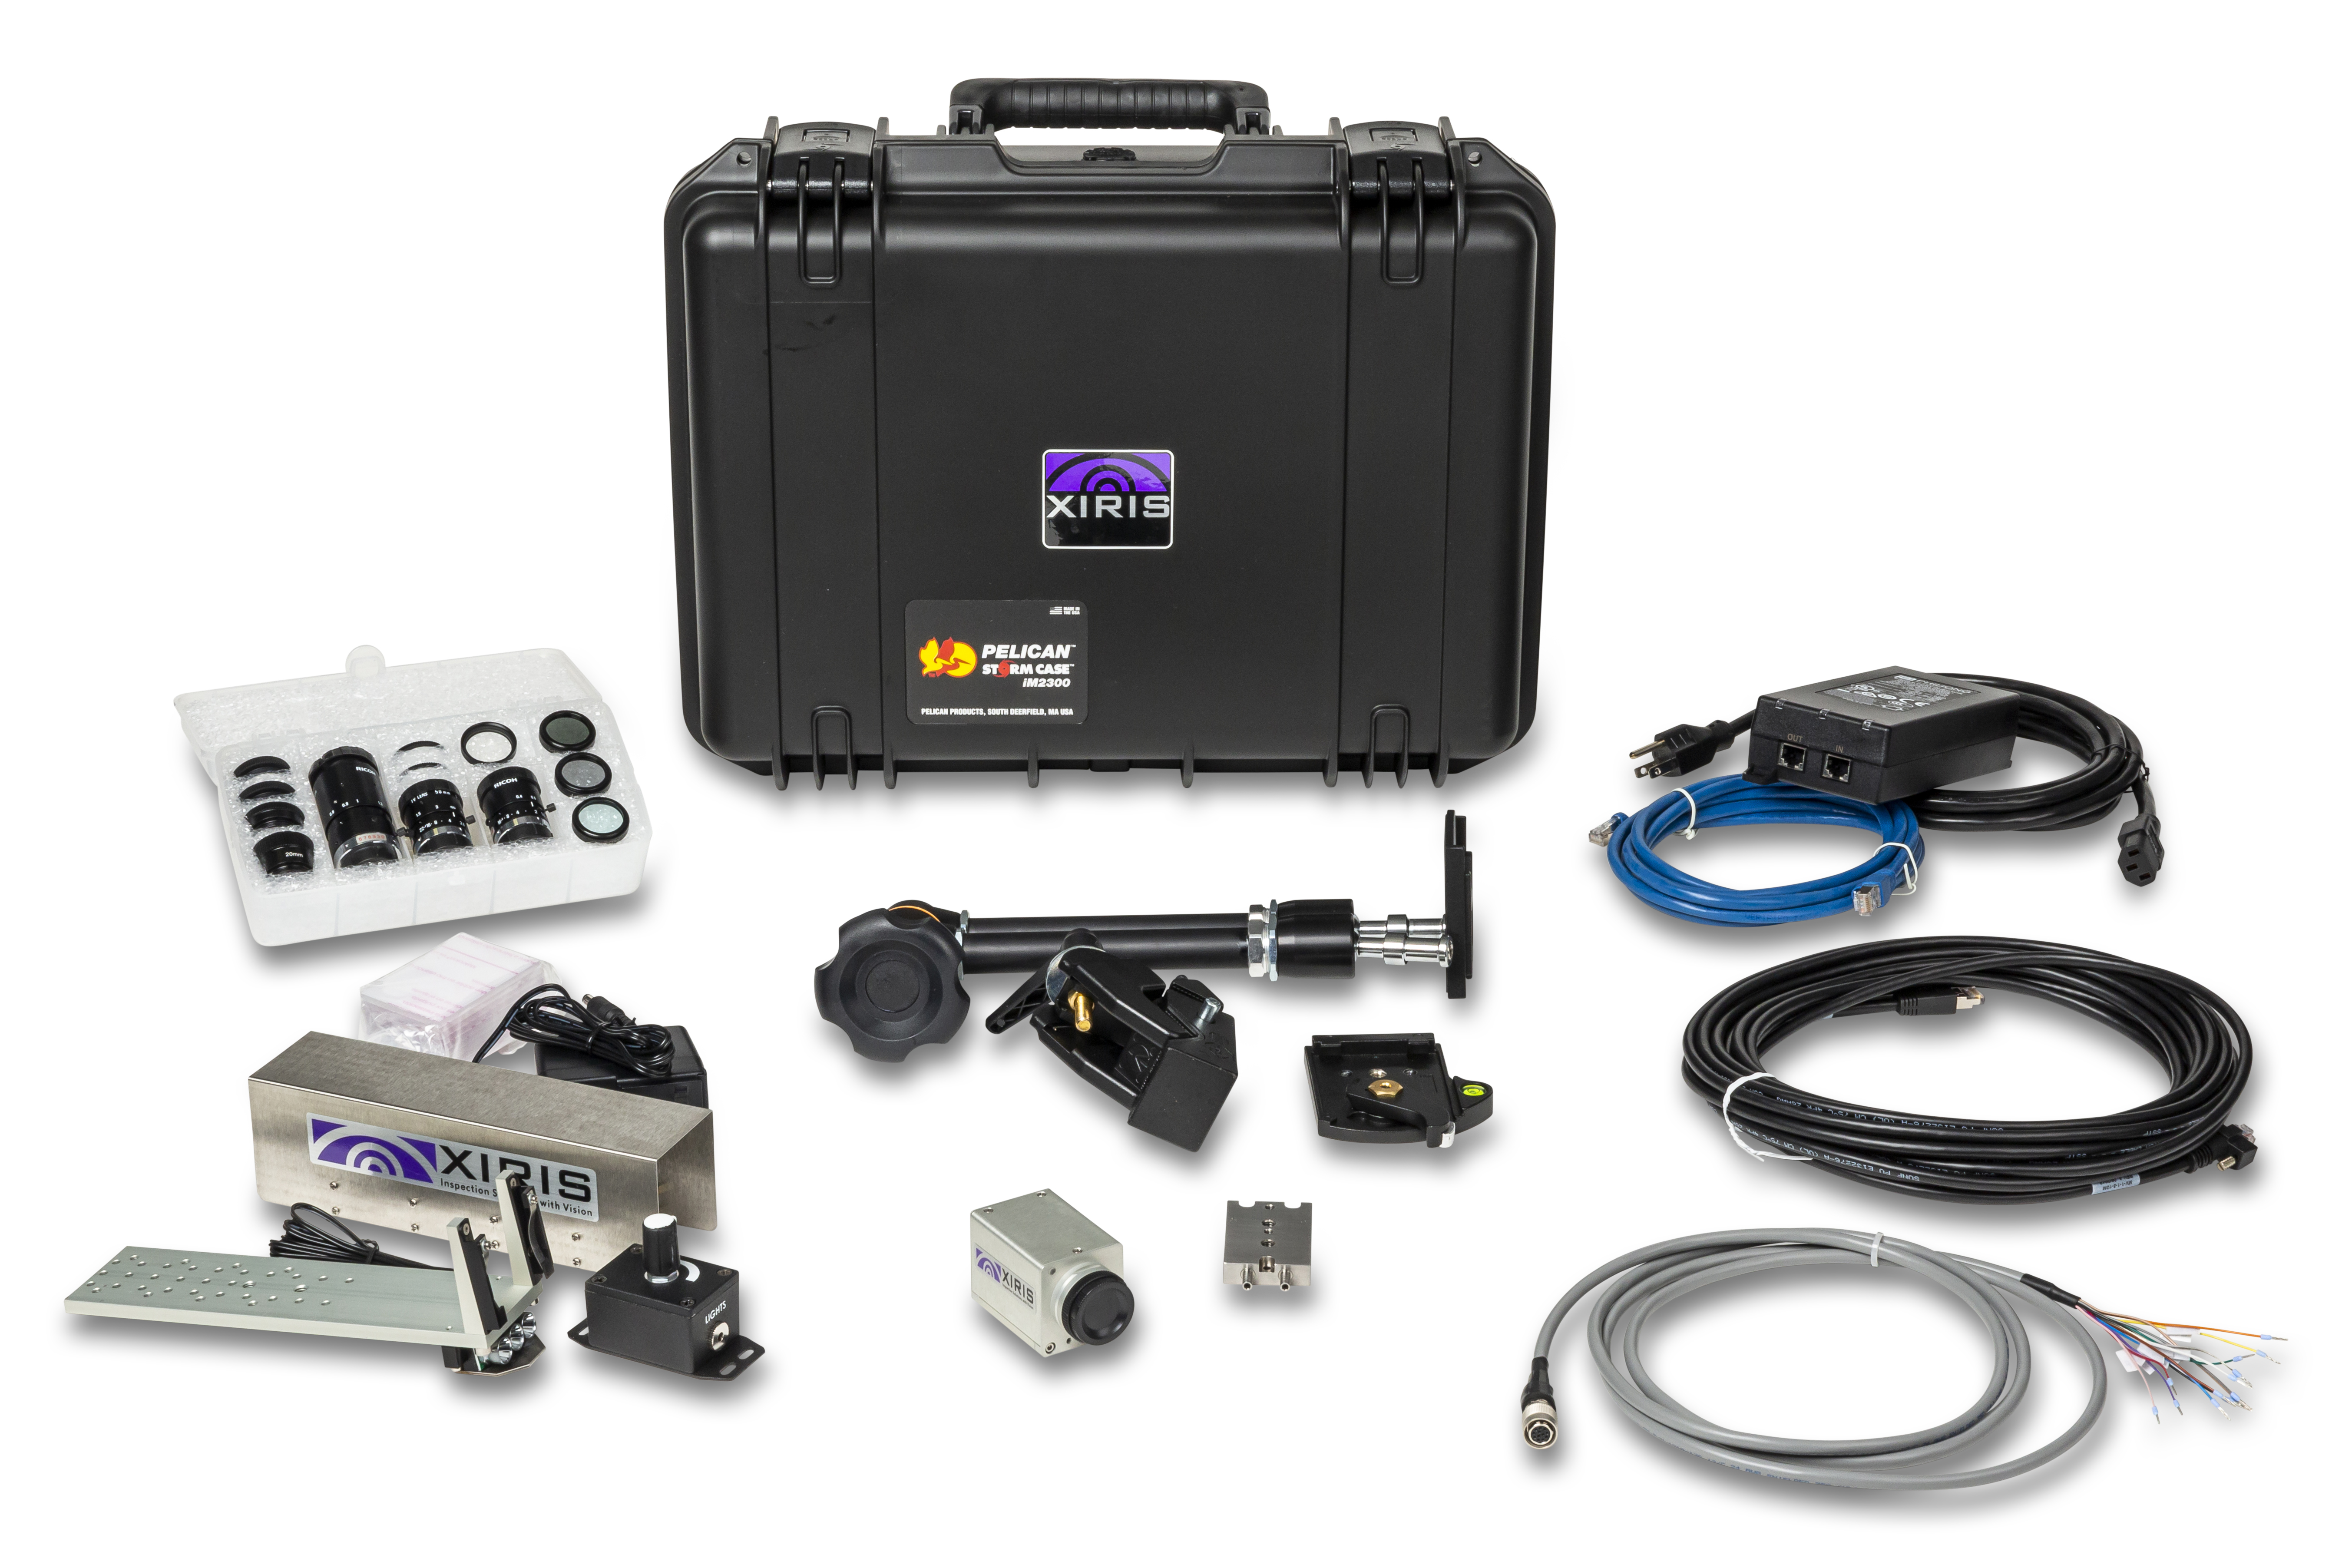 Weld Cameras: The New Tool to Teach Welding